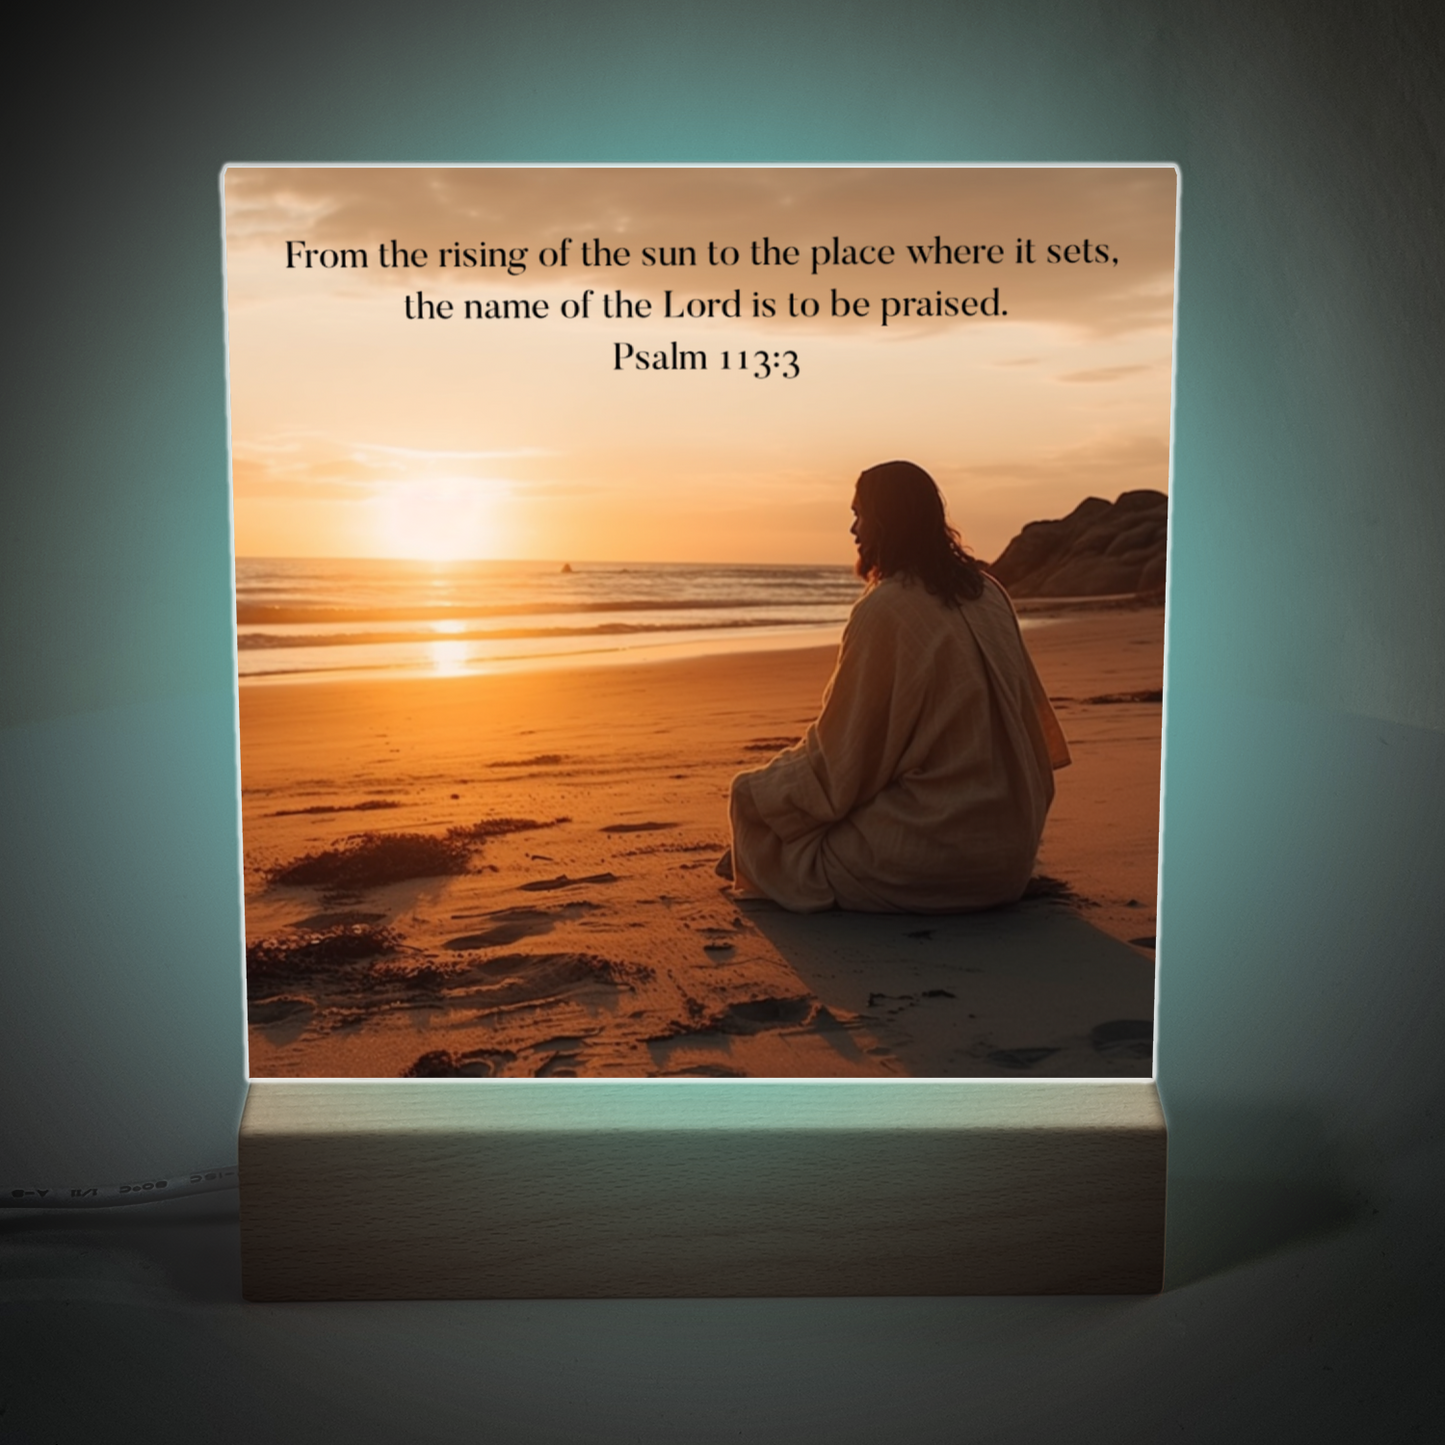 Christian Acrylic Square Plaque | From The Rising Sun To The Place Where It Sets | Psalm 113:3